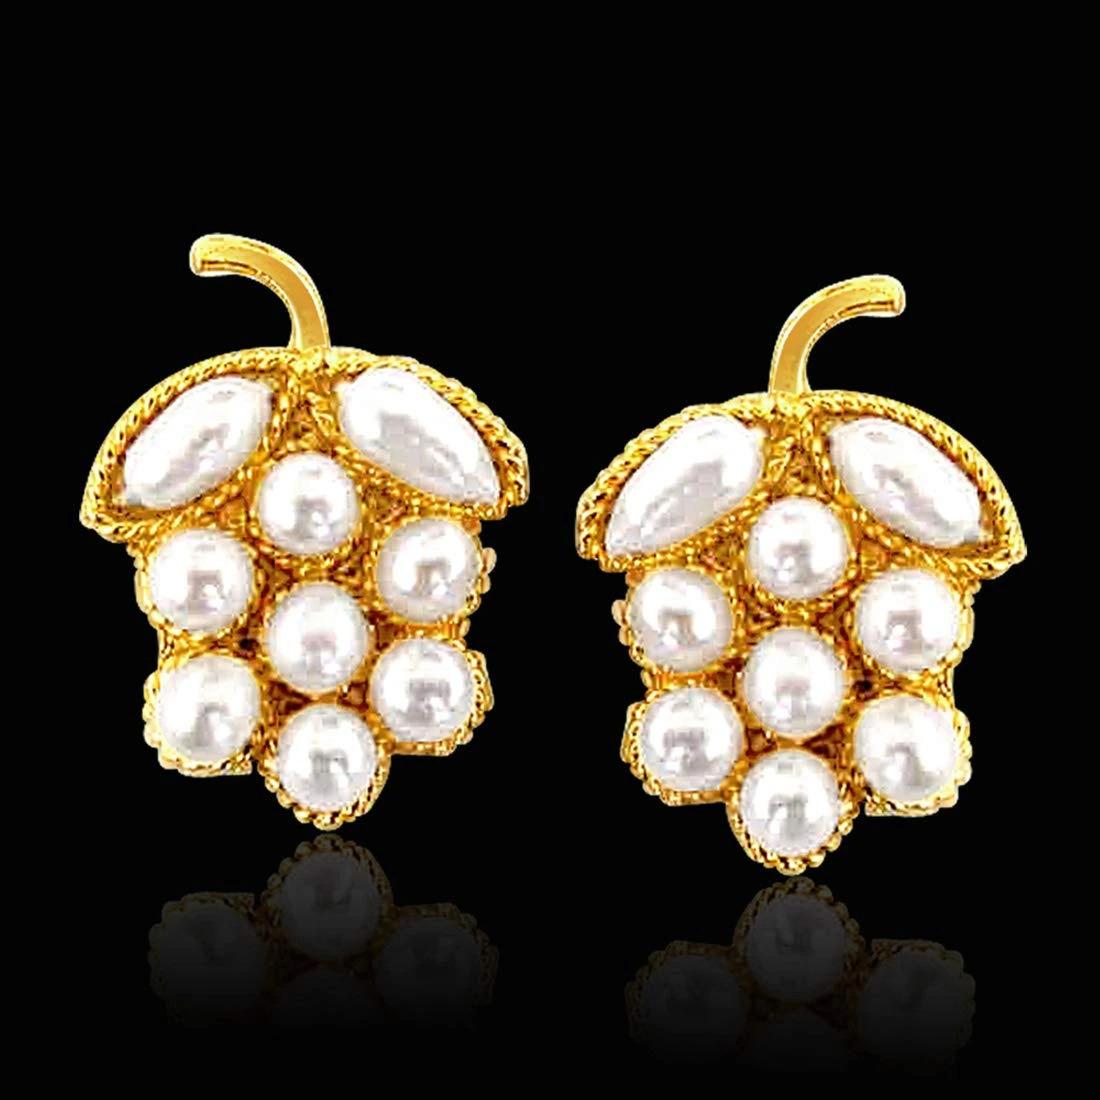 Lustrous Pearl Present - Real Freshwater Pearl & Gold Plated Grapes Shaped Earring for Women (SE42)